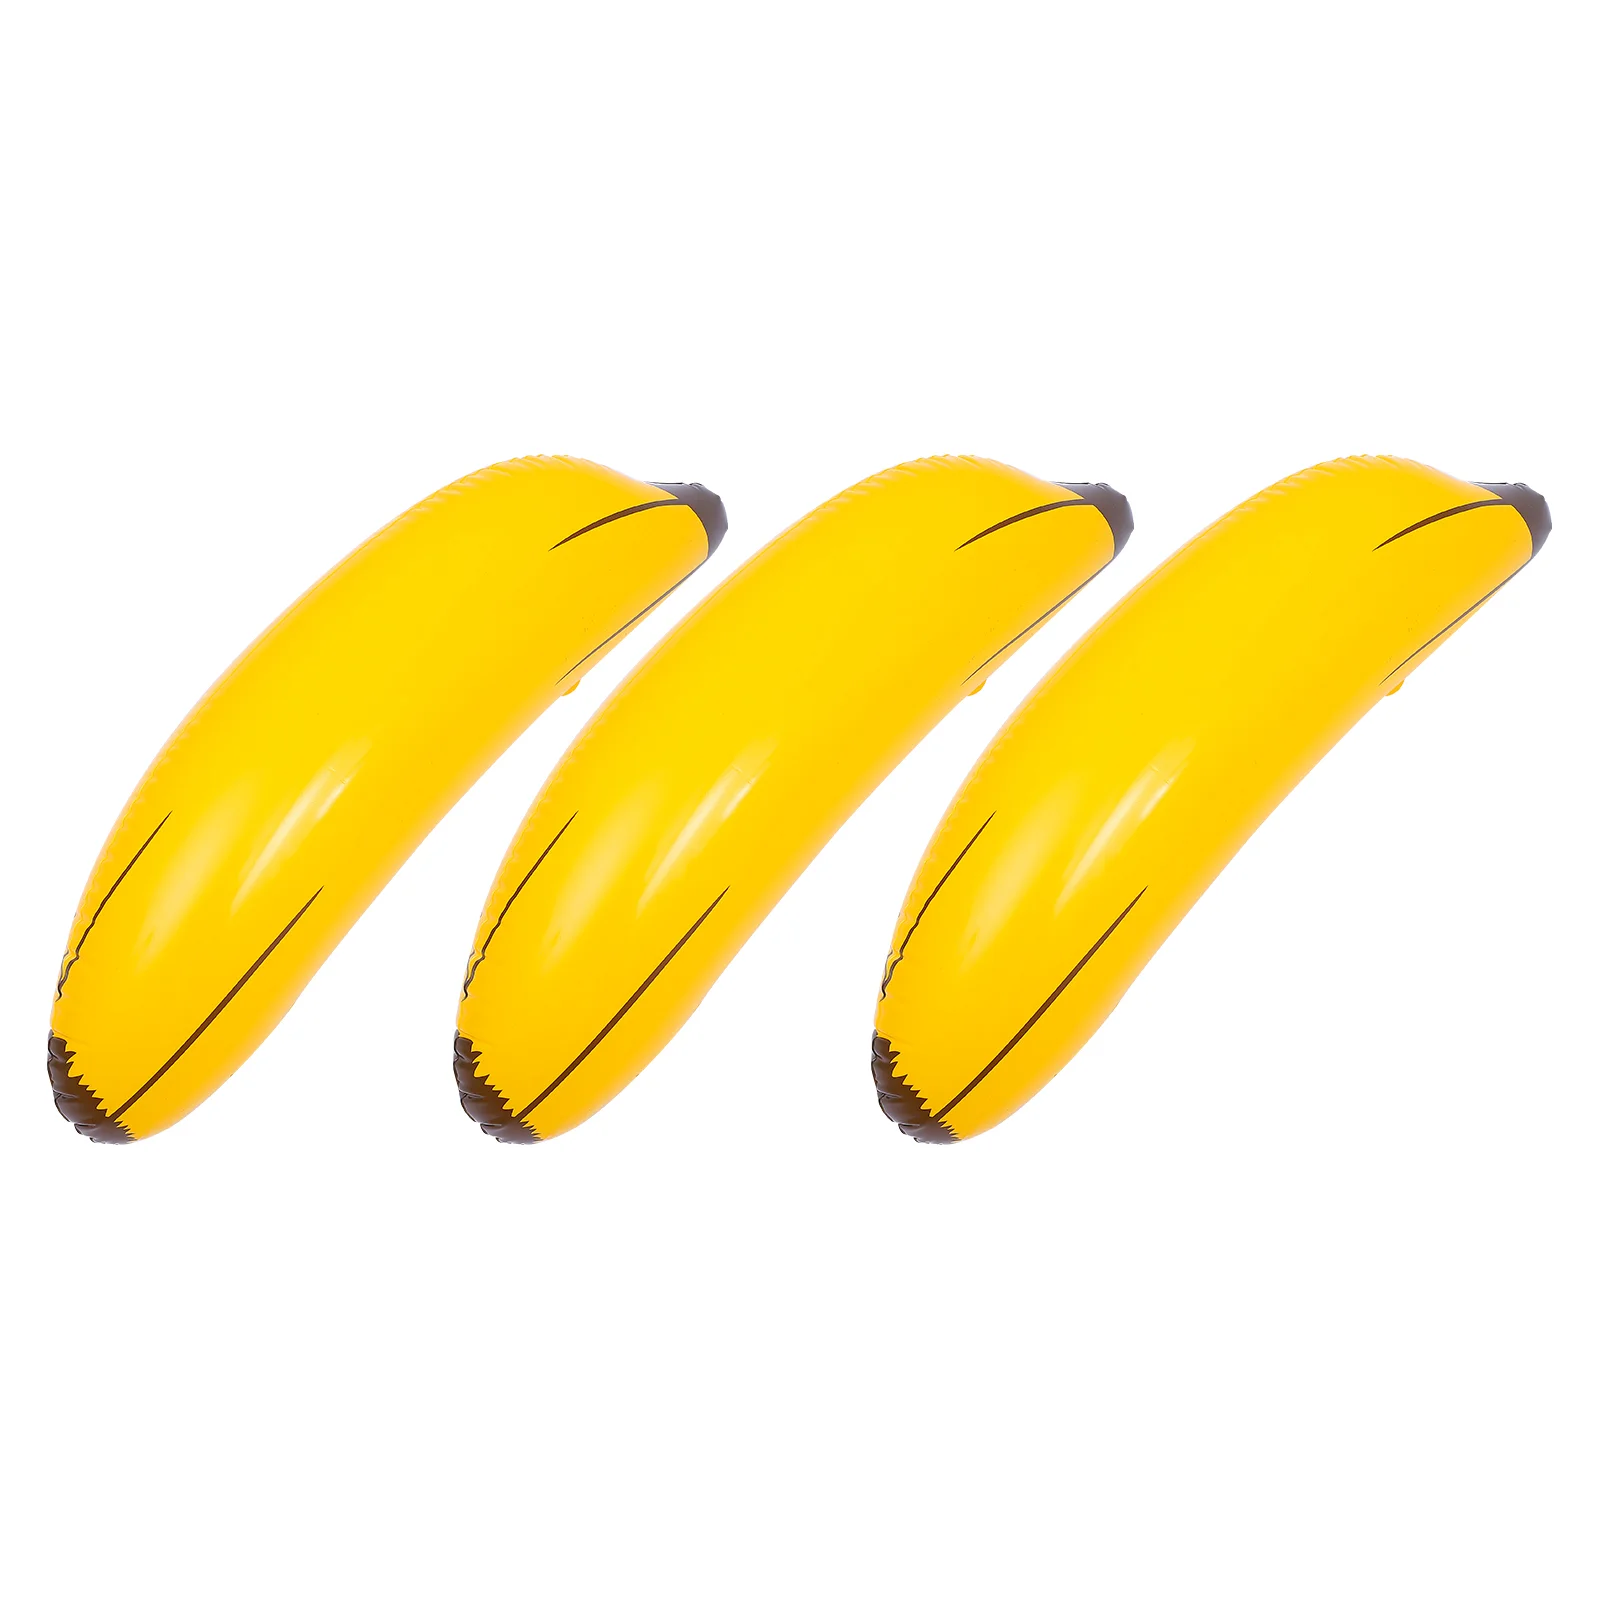 

3 Pcs Inflatable Banana Toy Kids Pool Decor Toss Game Engagement Swimming Party Decoration Pvc Bridal Shower Bride